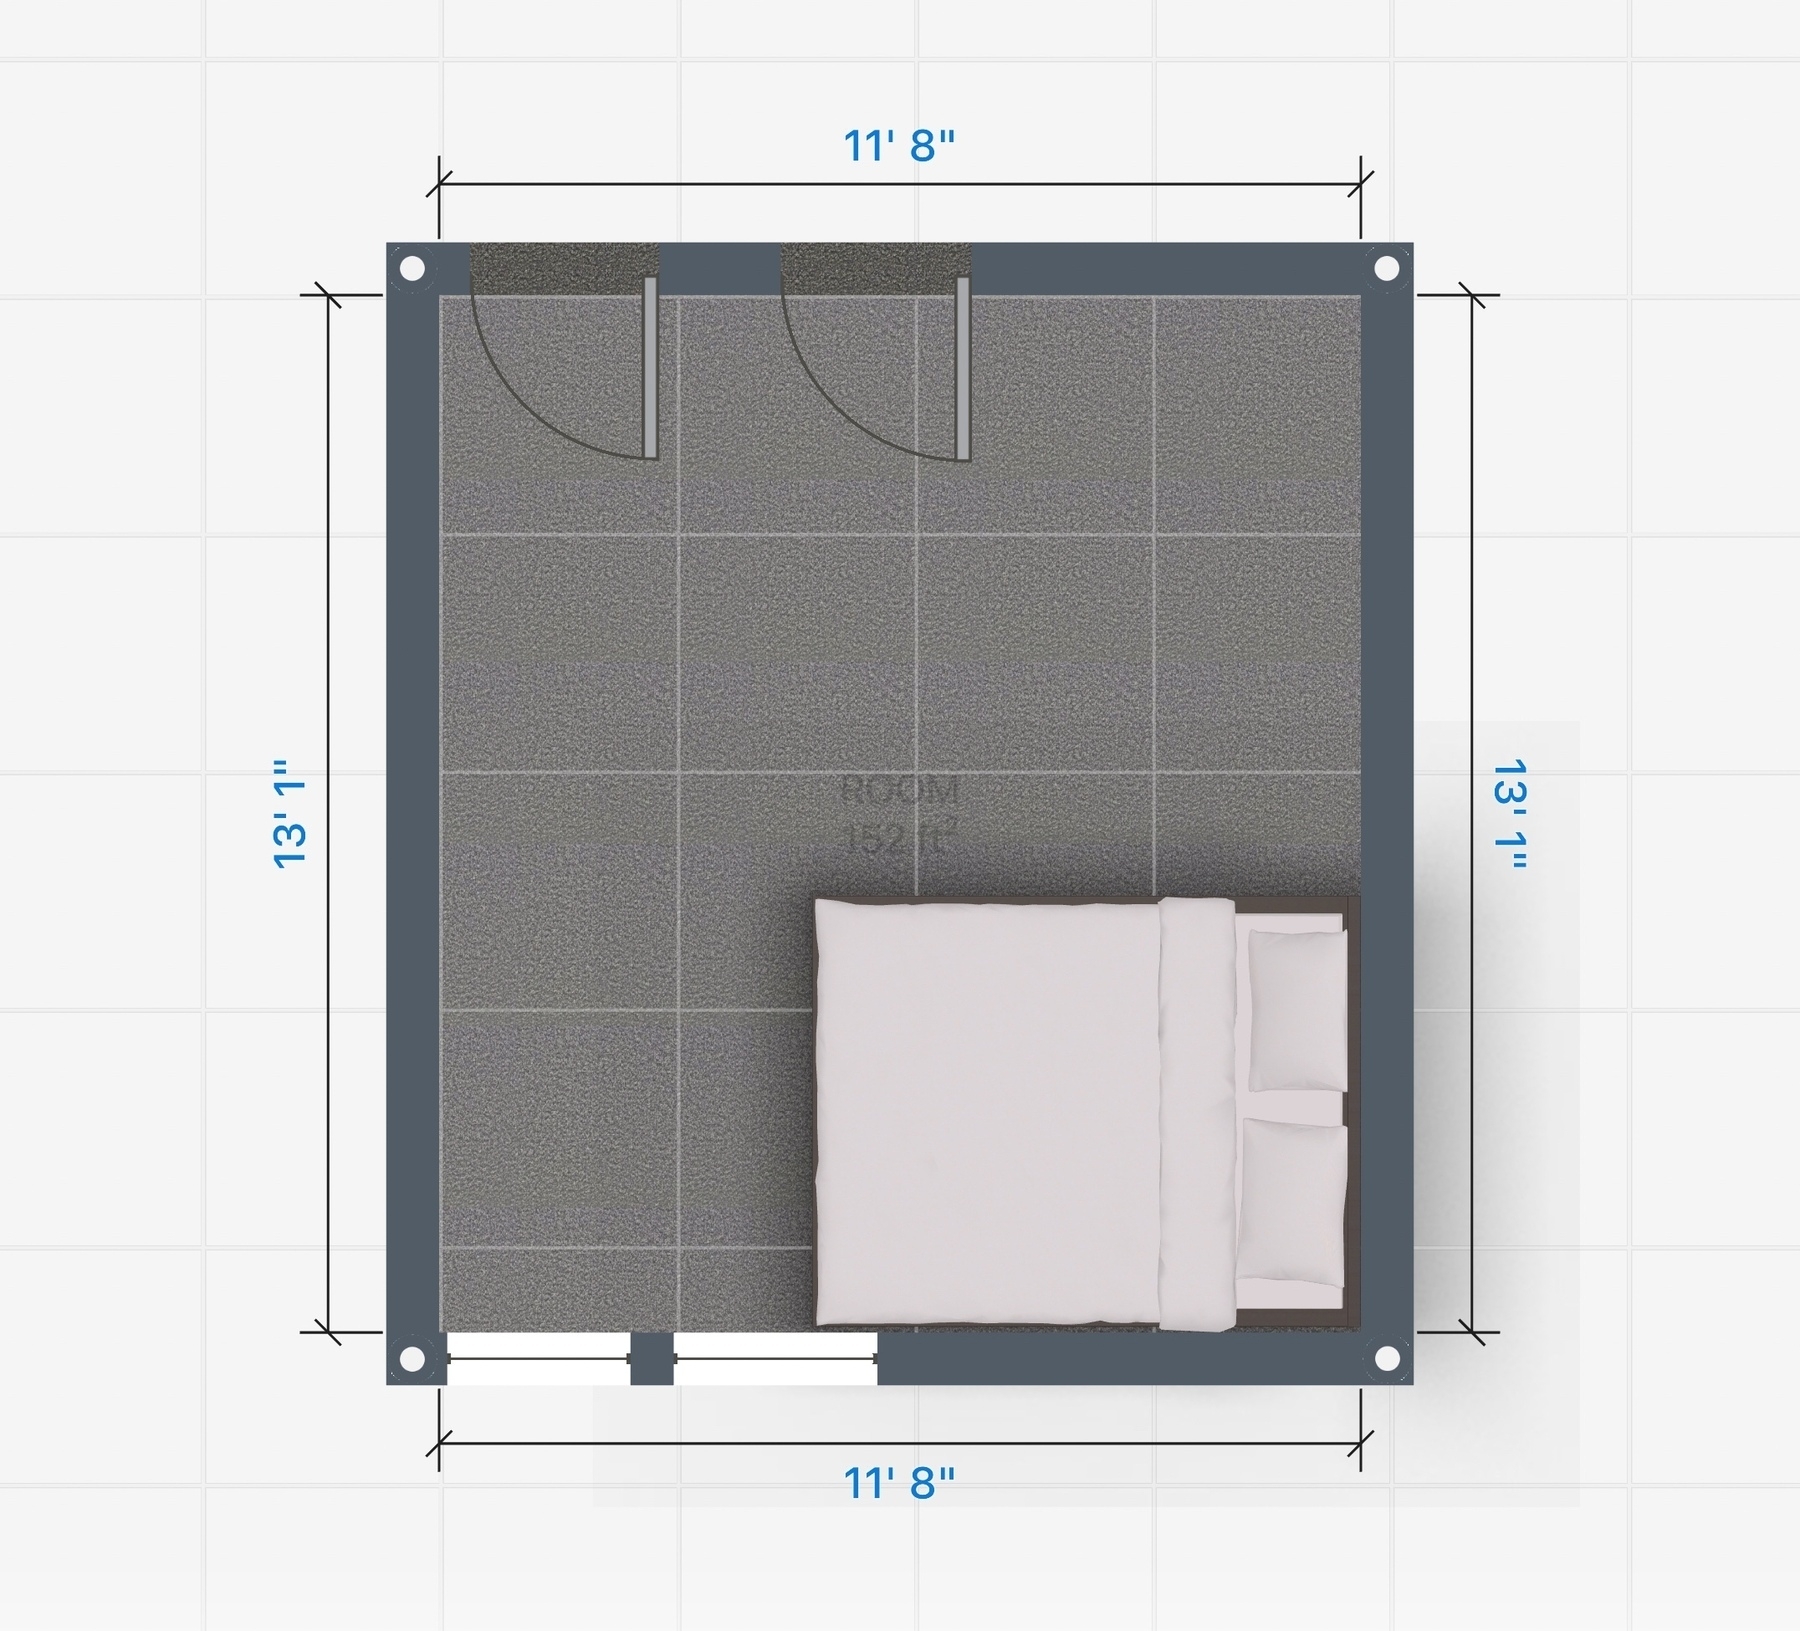 image of a room layout. the room is 11’8” by 13’1” there is a bed in the bottom right corner.